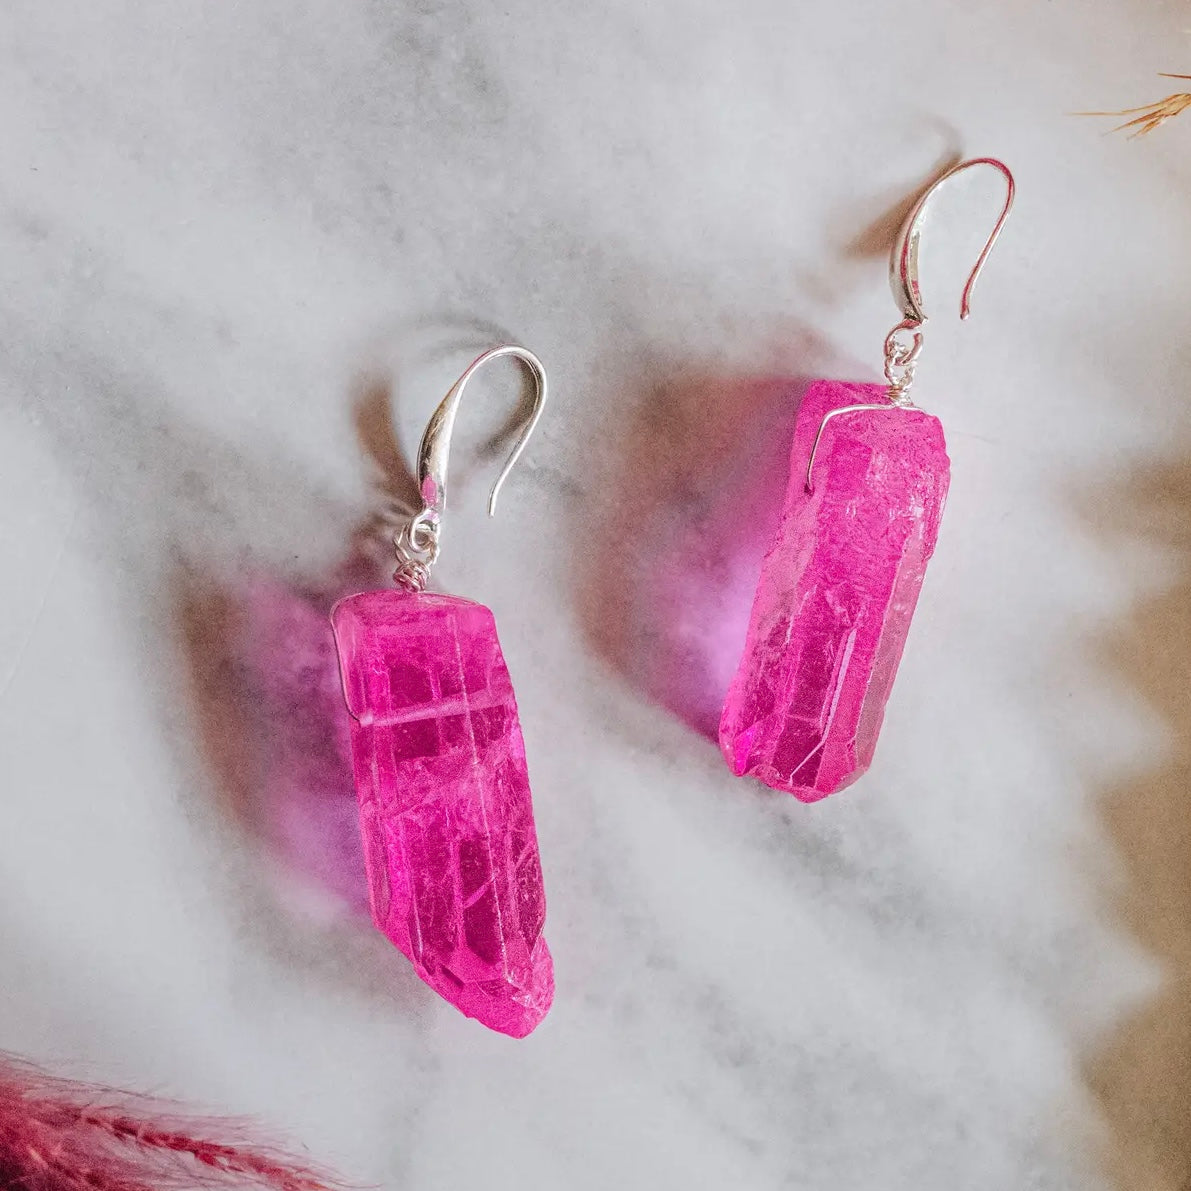 Earrings - Hot Pink Glitter Ball and Silver Disco Ball - Designed by  Distraction